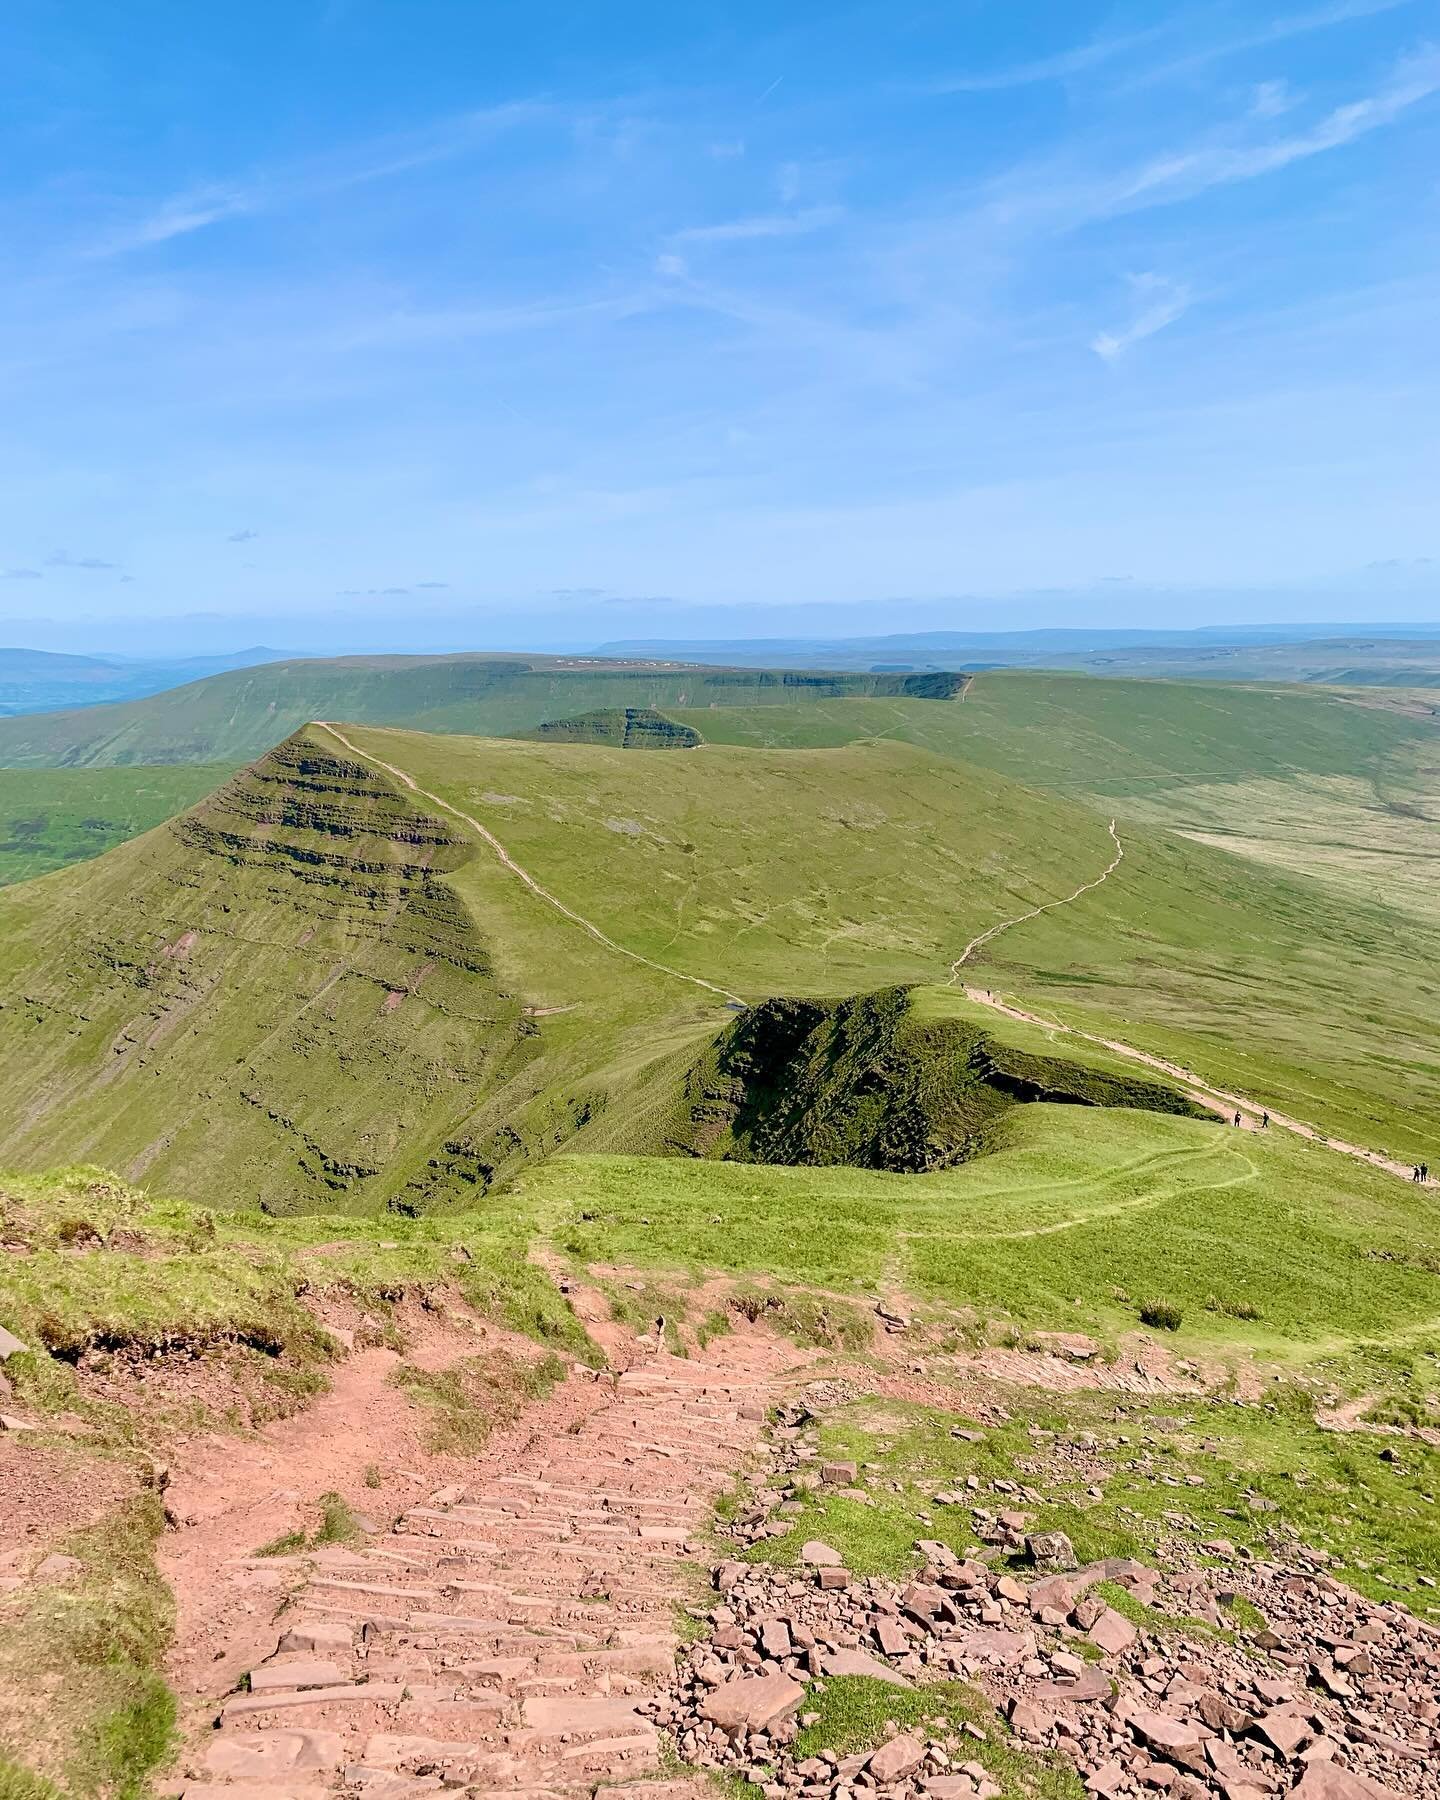 The most read blog post in April: the Pen-y-Fan hike! A super easy summit walk, with lots of add-ons for those wanting to go further. The Bannau Brycheiniog park offers so many stunning routes for day hikes and overnight camping trips, if you have be